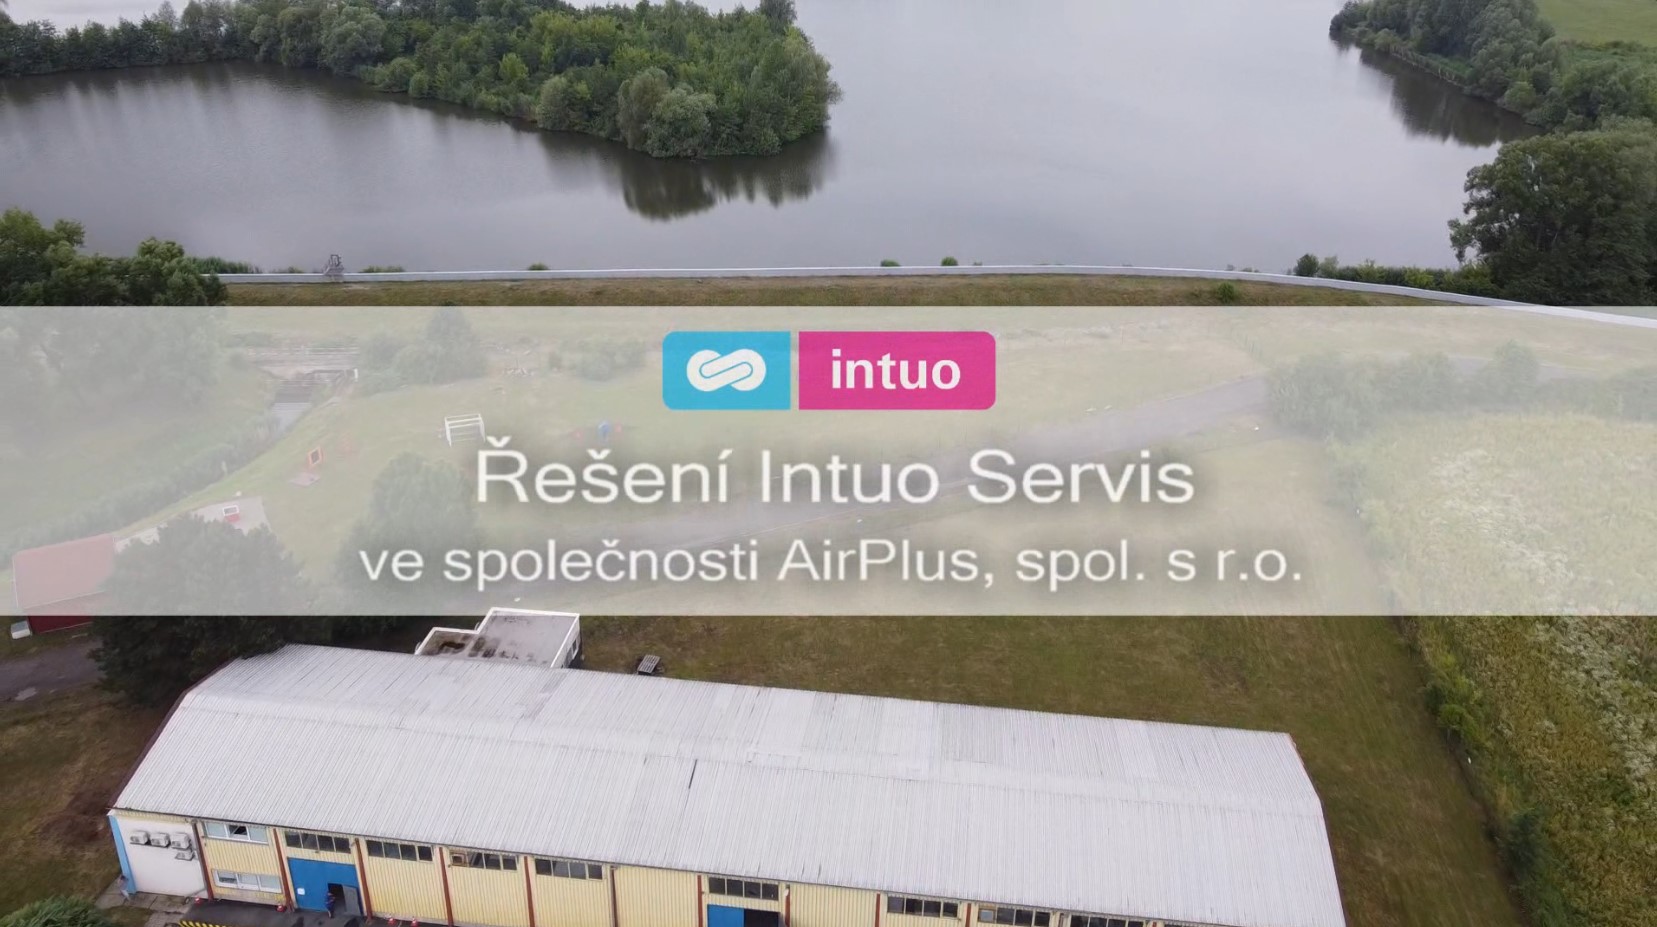 Intuo Servis v AirPlus